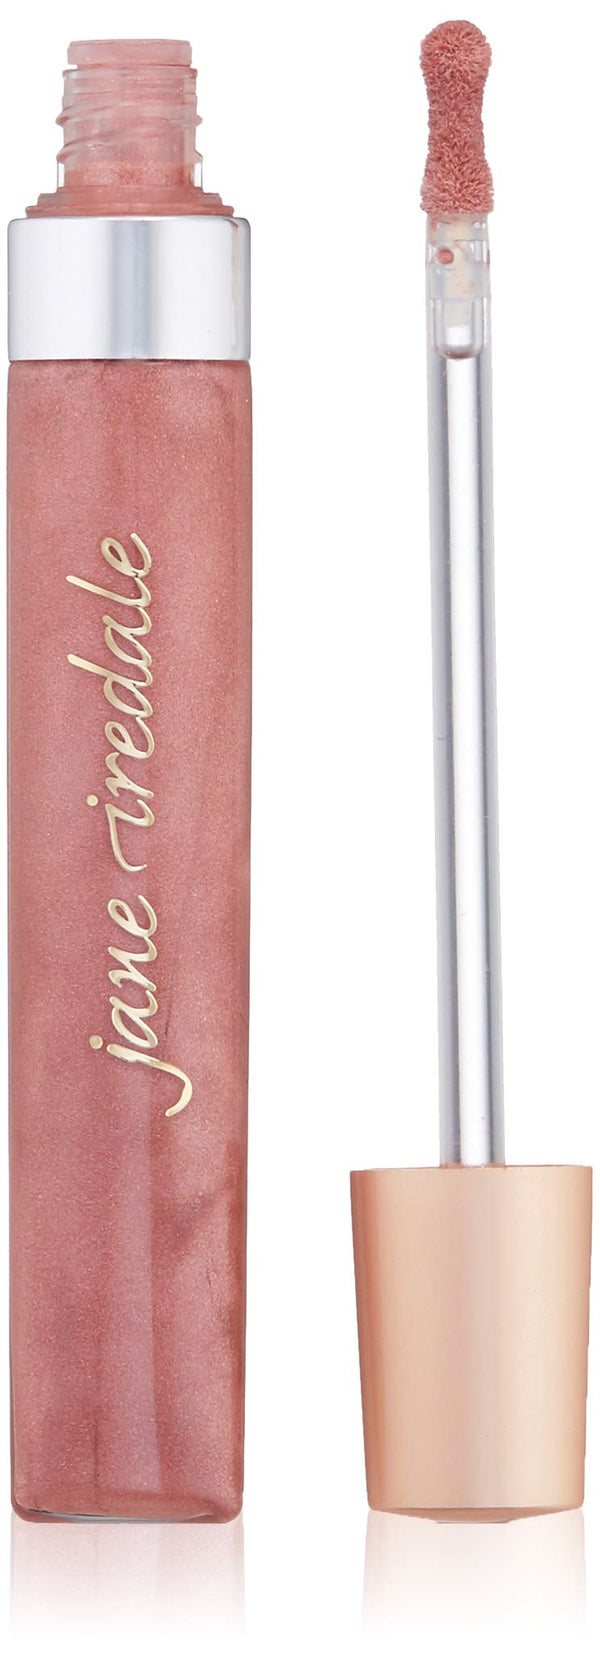 jane iredale PureGloss Lip Gloss Soothes, Hydrates & Nourishes Lips Ultra Glossy with a Sheer Tint Long Lasting Vegan & Cruelty-Free Makeup